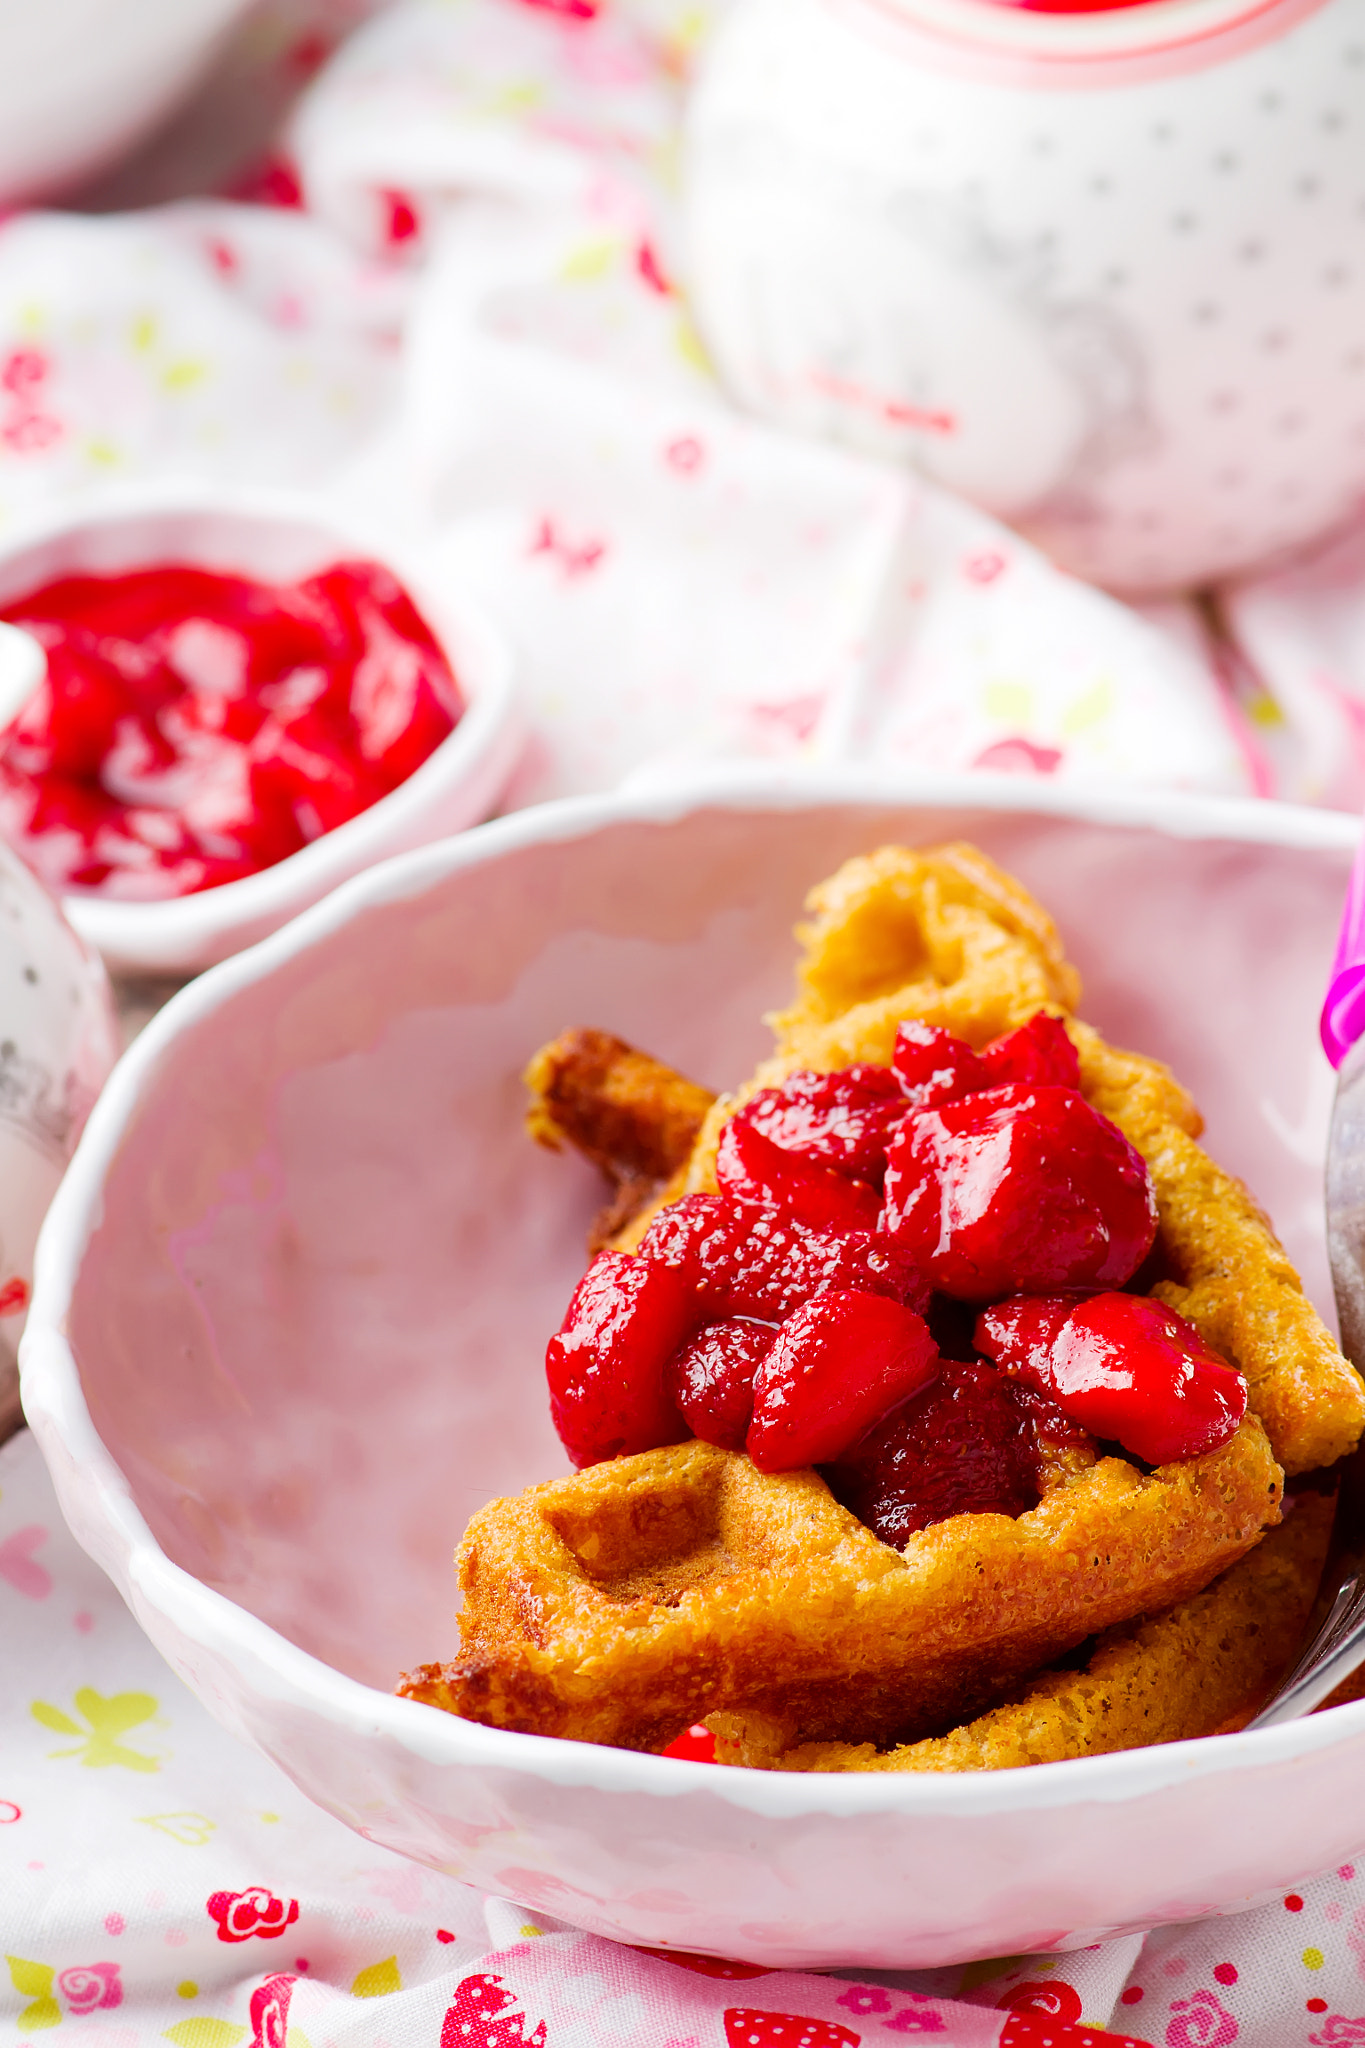 Nikon D3100 + Nikon AF-S Micro-Nikkor 105mm F2.8G IF-ED VR sample photo. Peanut butter strawberry compote waffles photography